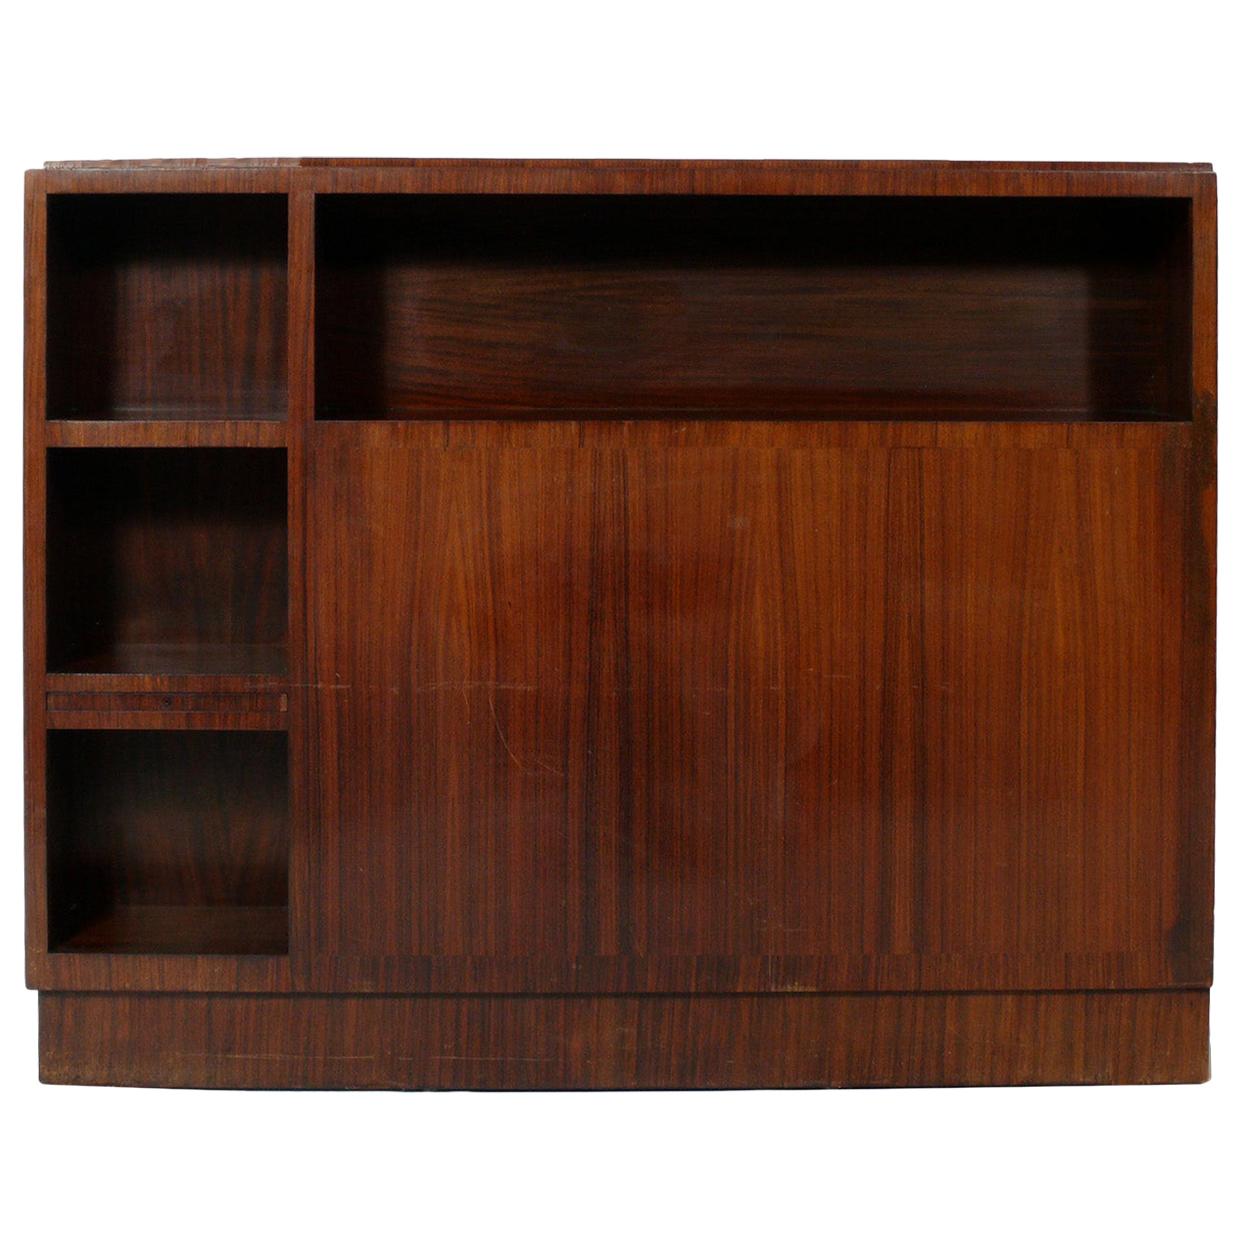 French Art Deco Rosewood Headboard or Bookcase